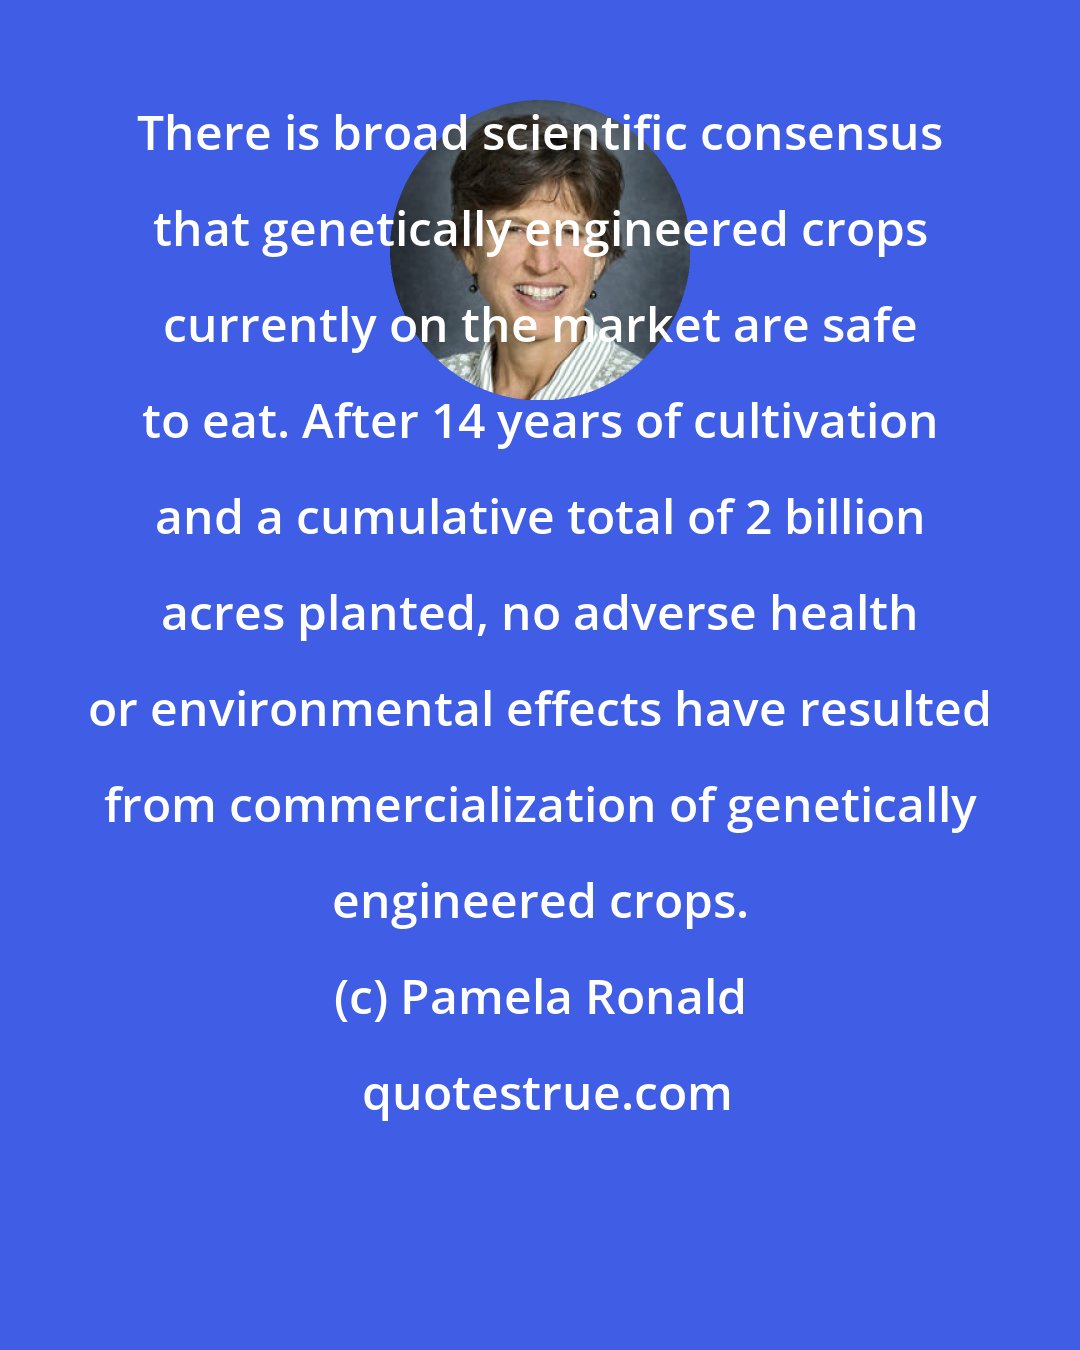 Pamela Ronald: There is broad scientiﬁc consensus that genetically engineered crops currently on the market are safe to eat. After 14 years of cultivation and a cumulative total of 2 billion acres planted, no adverse health or environmental effects have resulted from commercialization of genetically engineered crops.